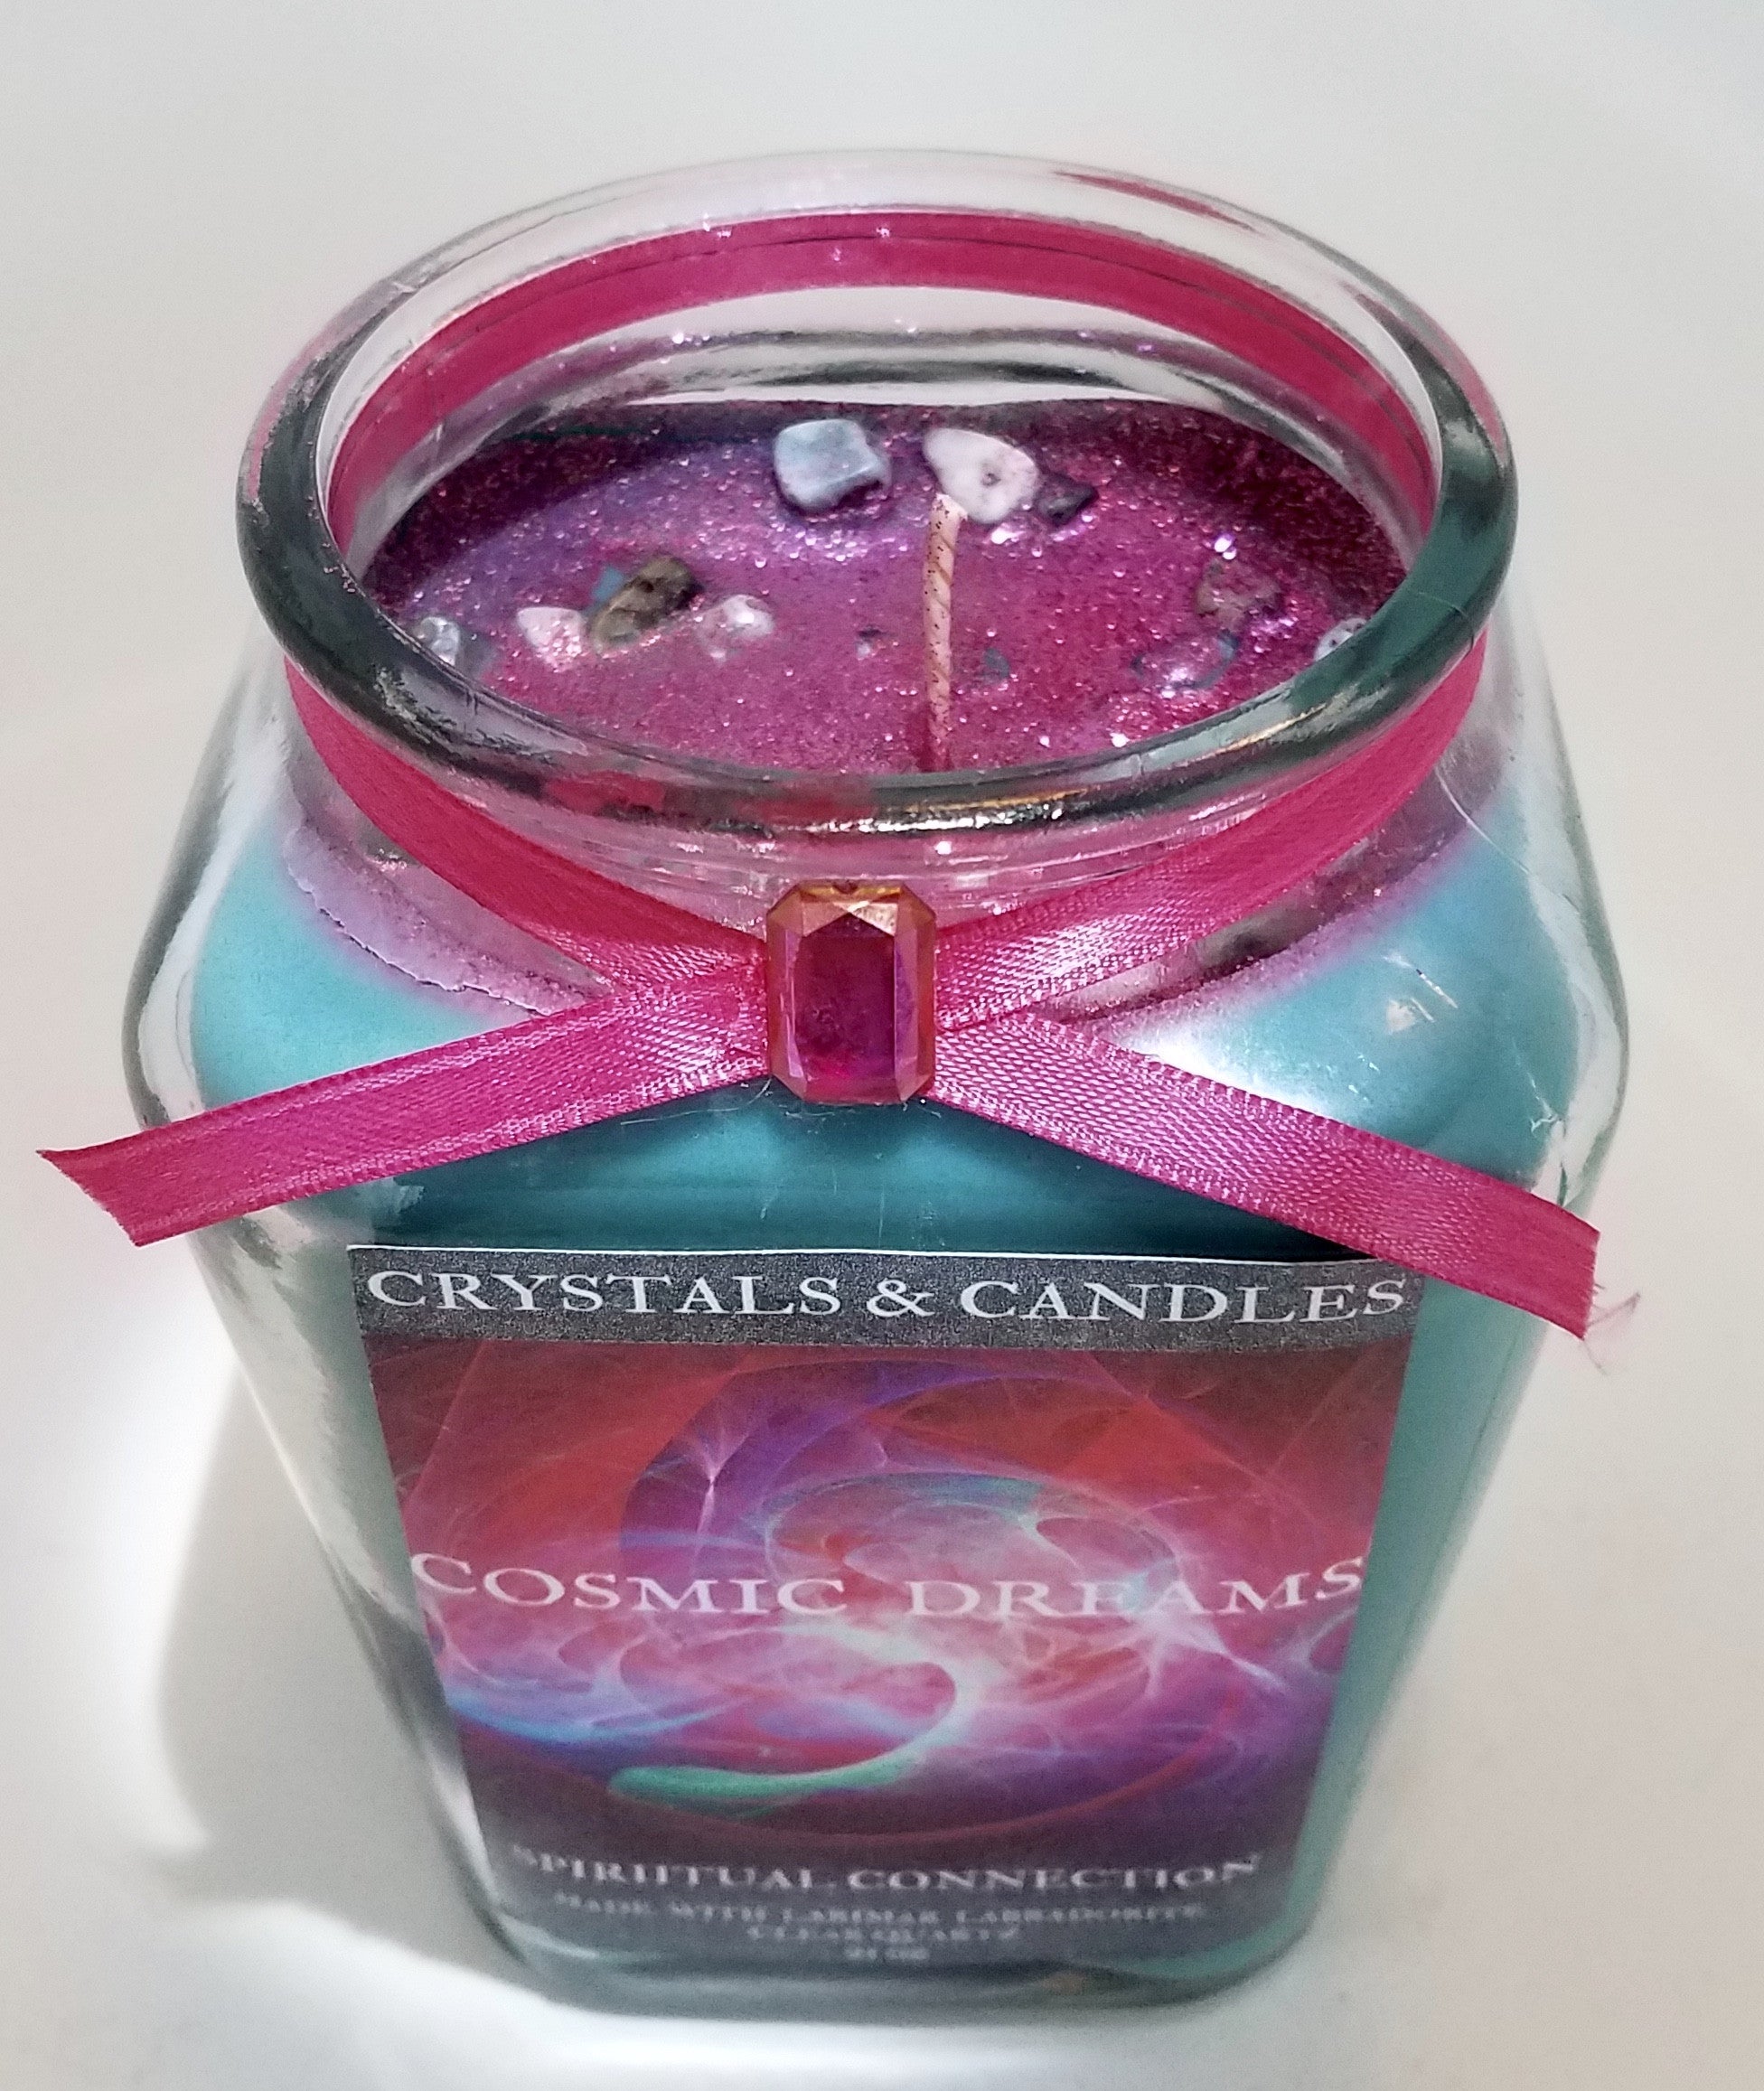 Cosmic Consciousness - Candles For Spiritual Connection Jewelry Candle